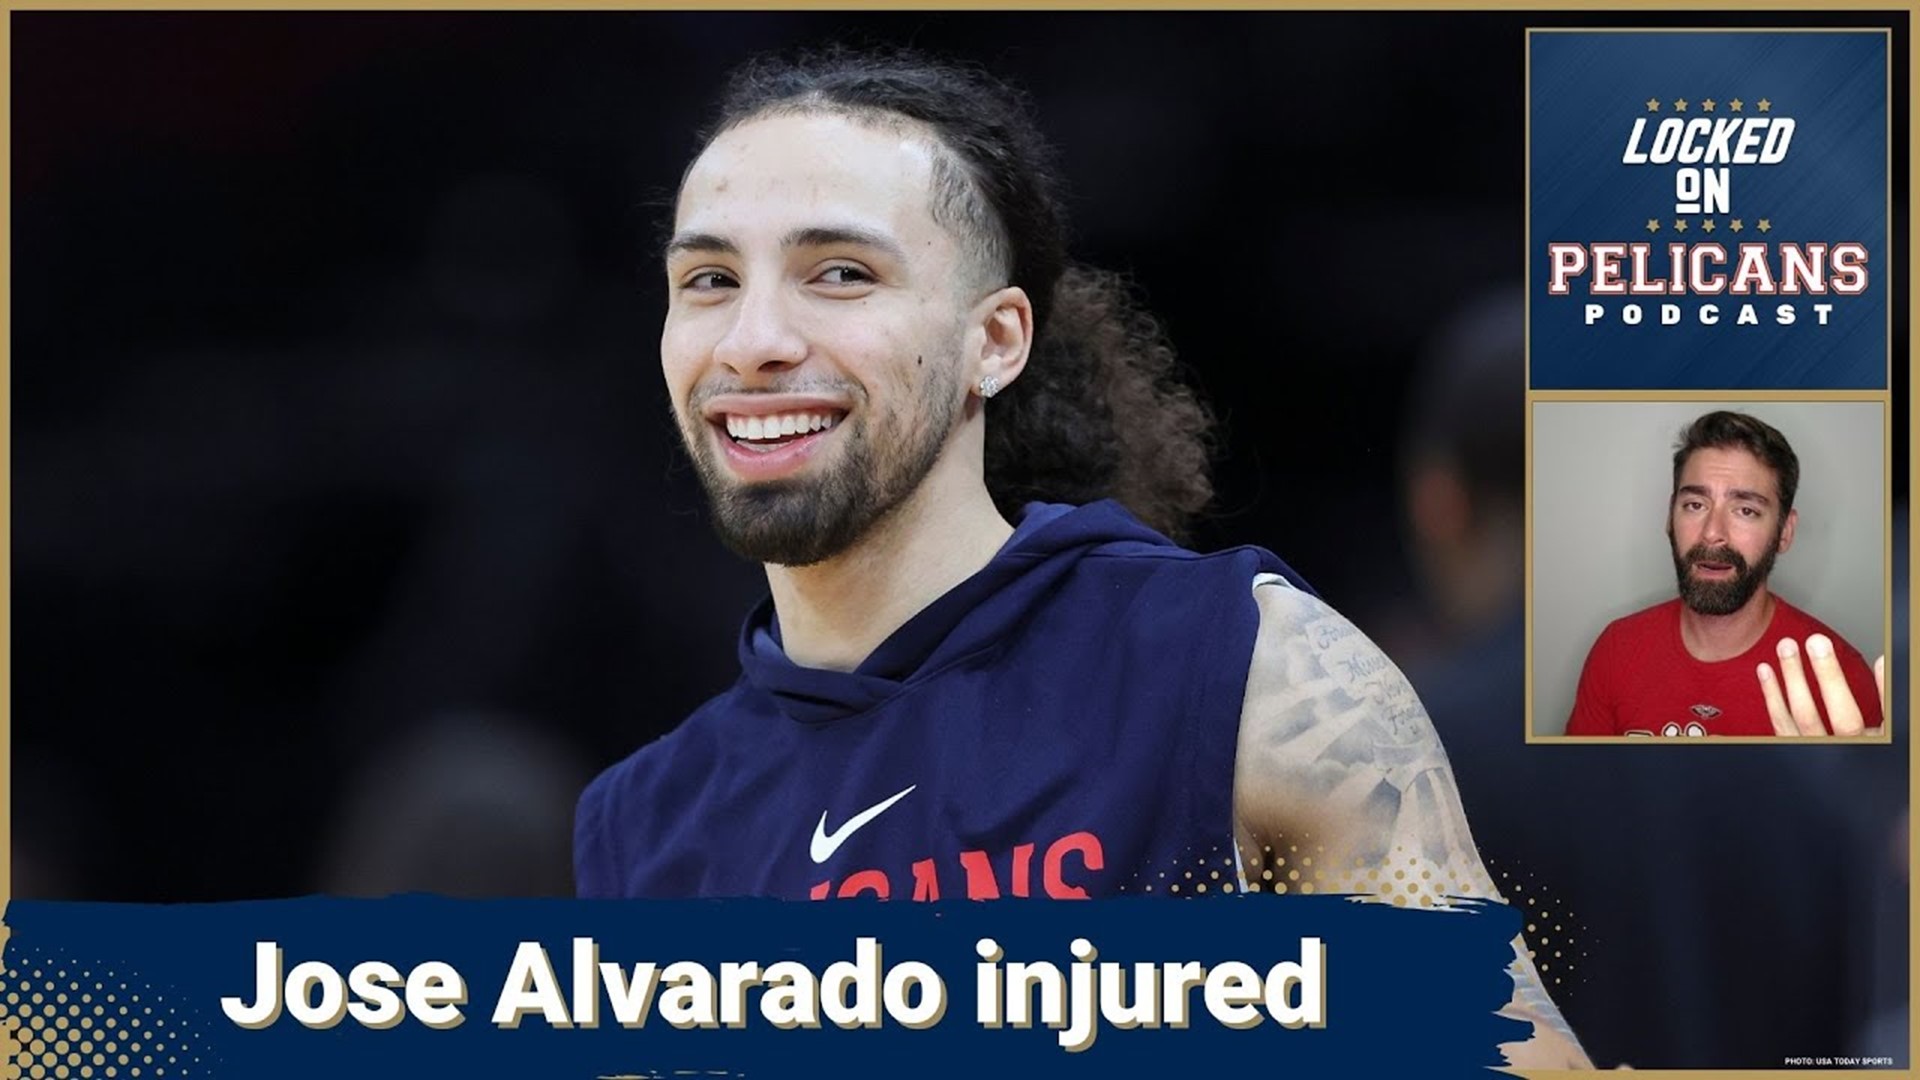 The New Orleans Pelicans and injuries is a tale as old as time. Now it's Jose Alvarado who will miss time with an ankle sprain.